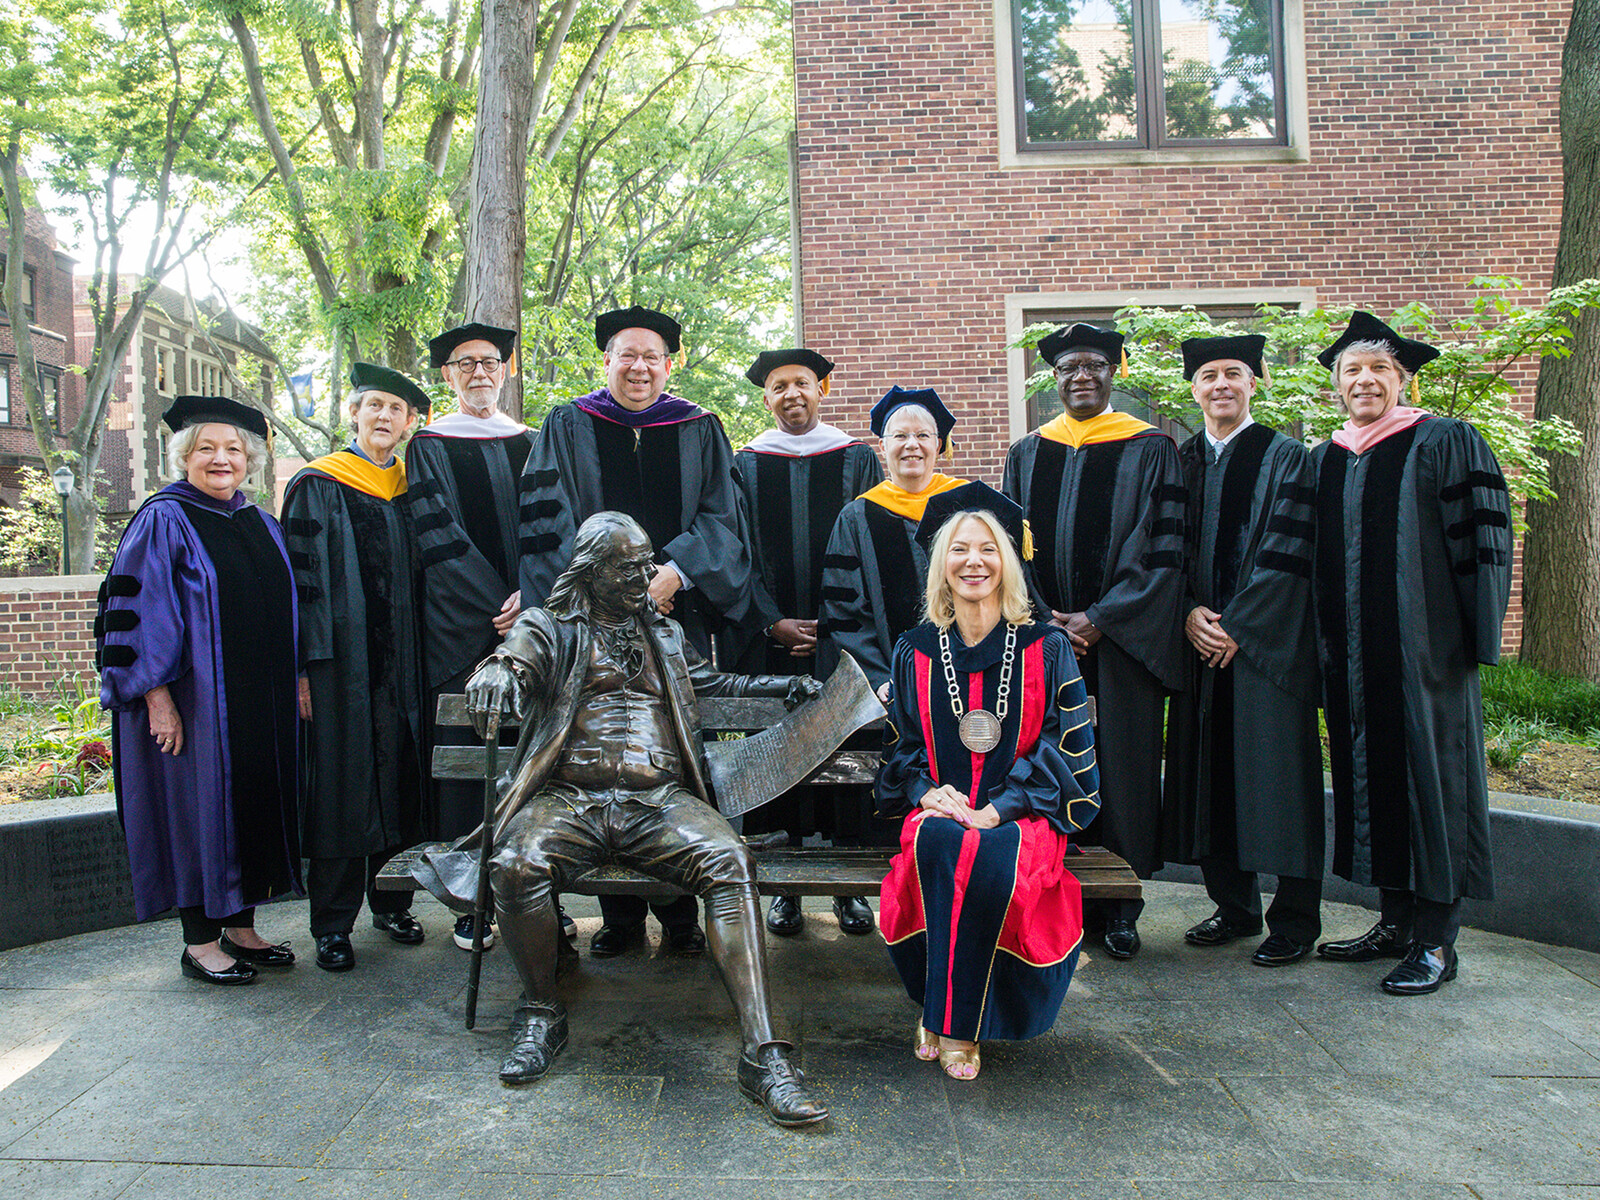 2019 Penn Commencement honorary degree recipients in regalia